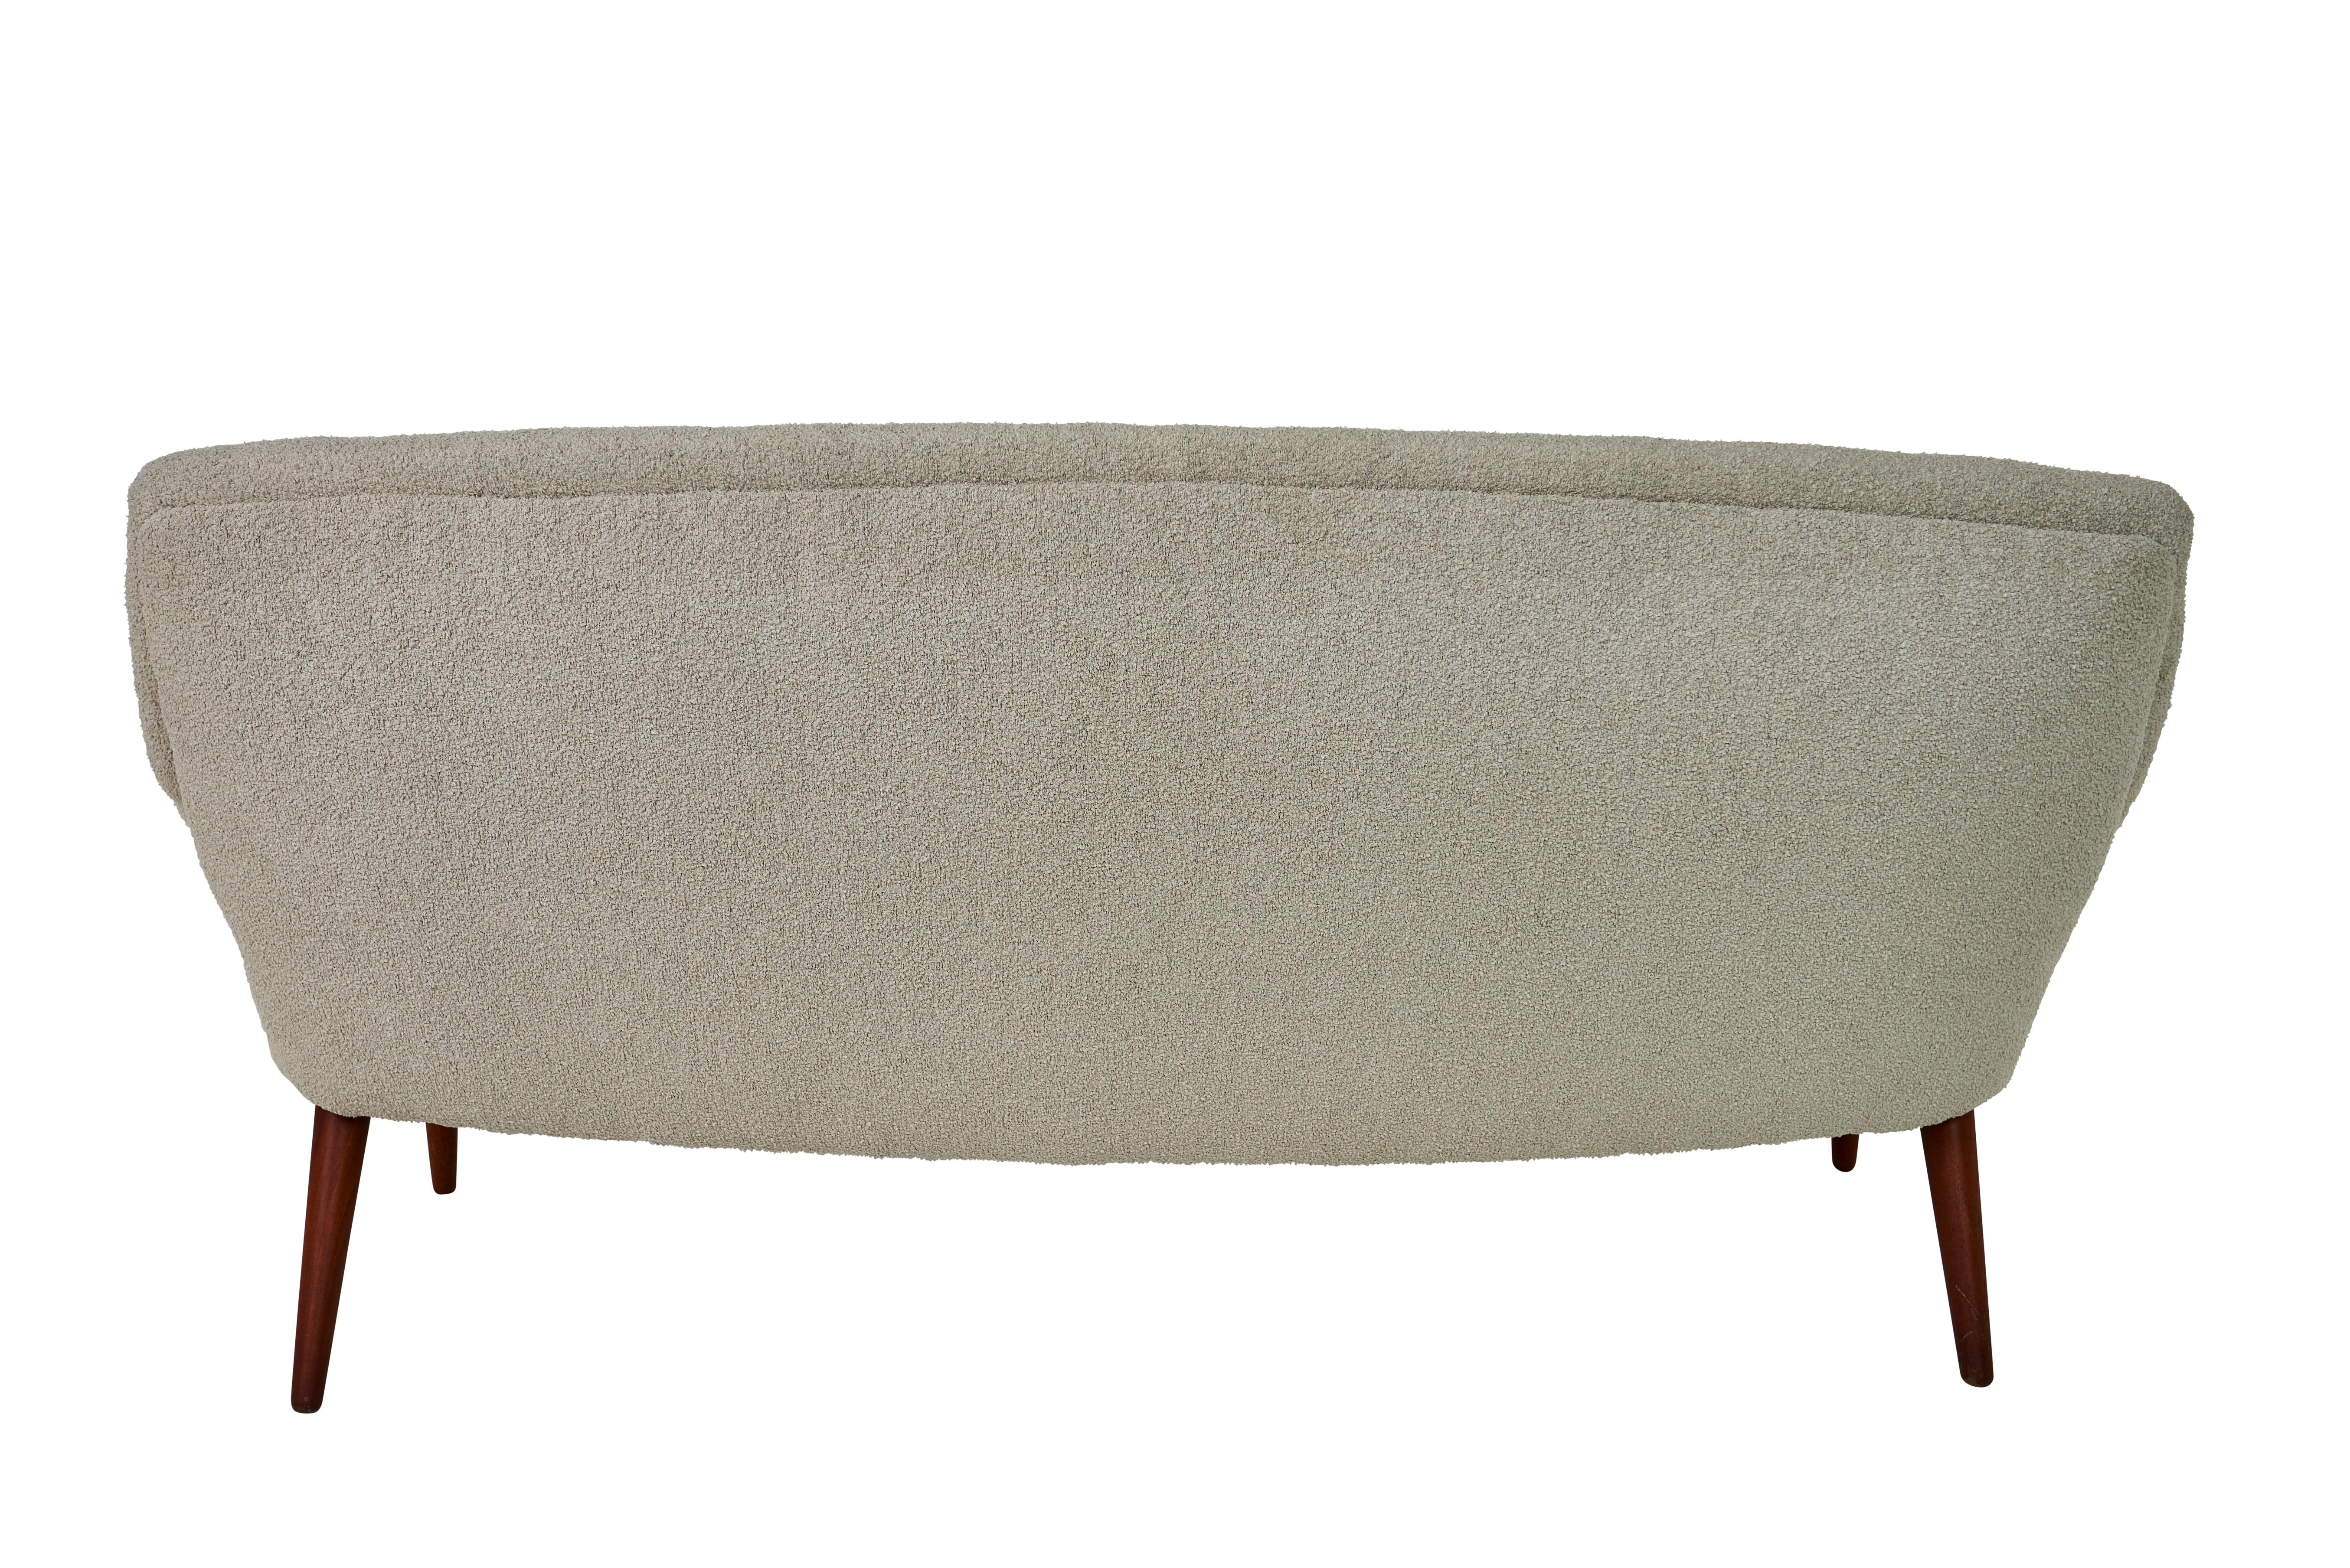 This midcentury Danish settee sits atop four wood legs.

Since Schumacher was founded in 1889, our family-owned company has been synonymous with style, taste, and innovation. A passion for luxury and an unwavering commitment to beauty are woven into